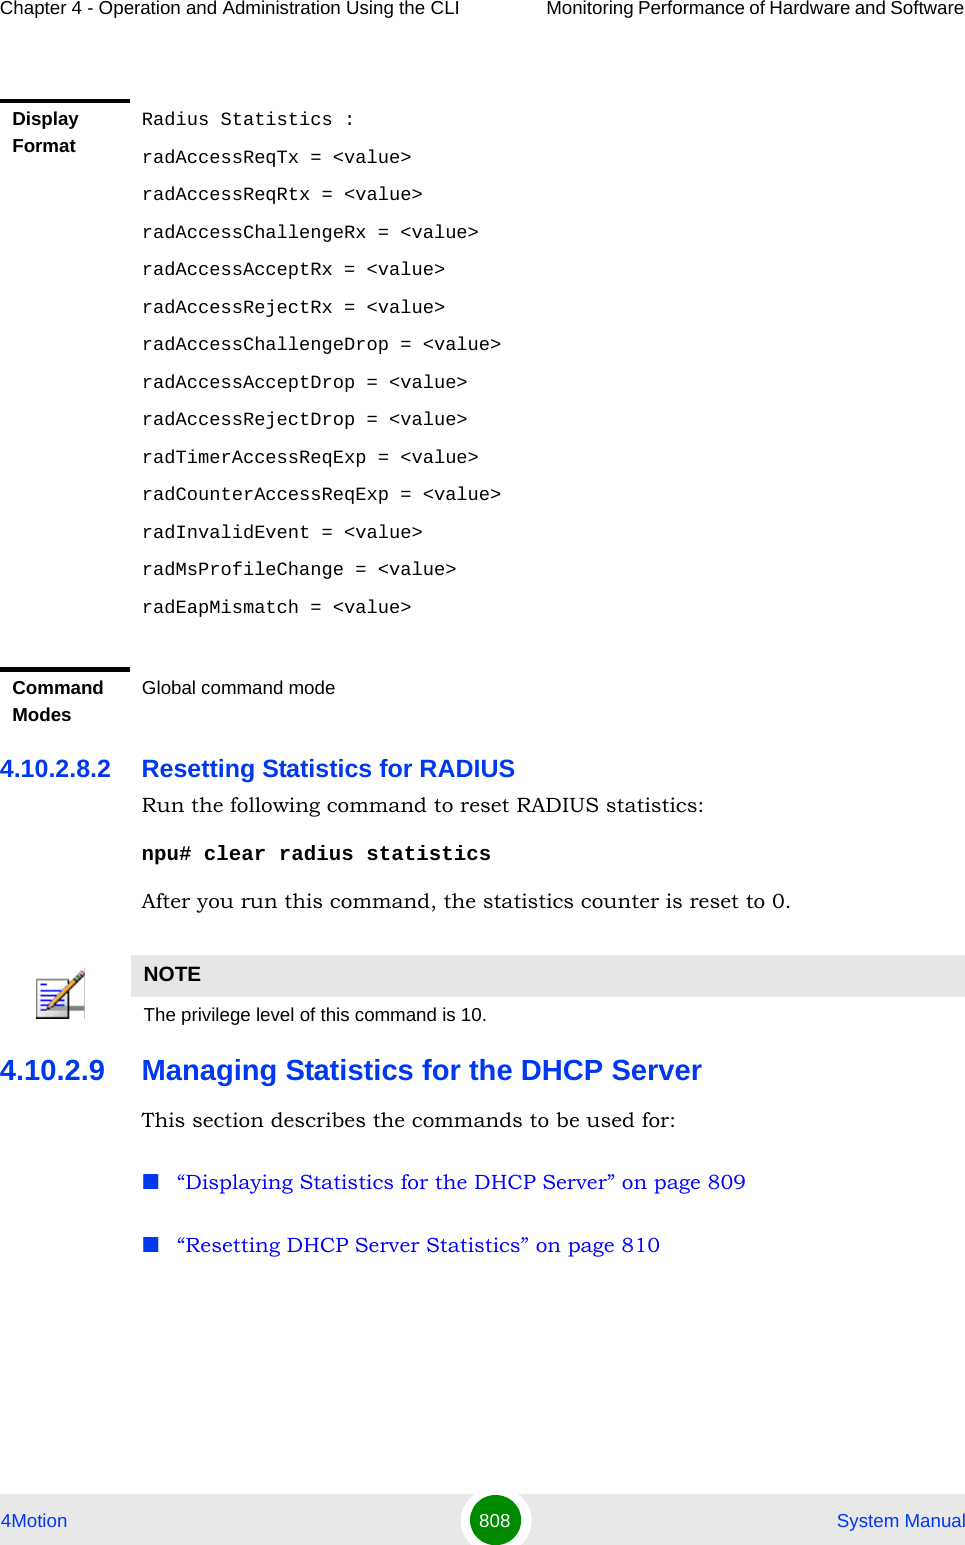 Chapter 4 - Operation and Administration Using the CLI Monitoring Performance of Hardware and Software 4Motion 808  System Manual4.10.2.8.2 Resetting Statistics for RADIUS Run the following command to reset RADIUS statistics:npu# clear radius statisticsAfter you run this command, the statistics counter is reset to 0. 4.10.2.9 Managing Statistics for the DHCP ServerThis section describes the commands to be used for:“Displaying Statistics for the DHCP Server” on page 809“Resetting DHCP Server Statistics” on page 810Display FormatRadius Statistics :radAccessReqTx = &lt;value&gt;radAccessReqRtx = &lt;value&gt;radAccessChallengeRx = &lt;value&gt;radAccessAcceptRx = &lt;value&gt;radAccessRejectRx = &lt;value&gt;radAccessChallengeDrop = &lt;value&gt;radAccessAcceptDrop = &lt;value&gt;radAccessRejectDrop = &lt;value&gt;radTimerAccessReqExp = &lt;value&gt;radCounterAccessReqExp = &lt;value&gt;radInvalidEvent = &lt;value&gt;radMsProfileChange = &lt;value&gt;radEapMismatch = &lt;value&gt;Command ModesGlobal command modeNOTEThe privilege level of this command is 10.